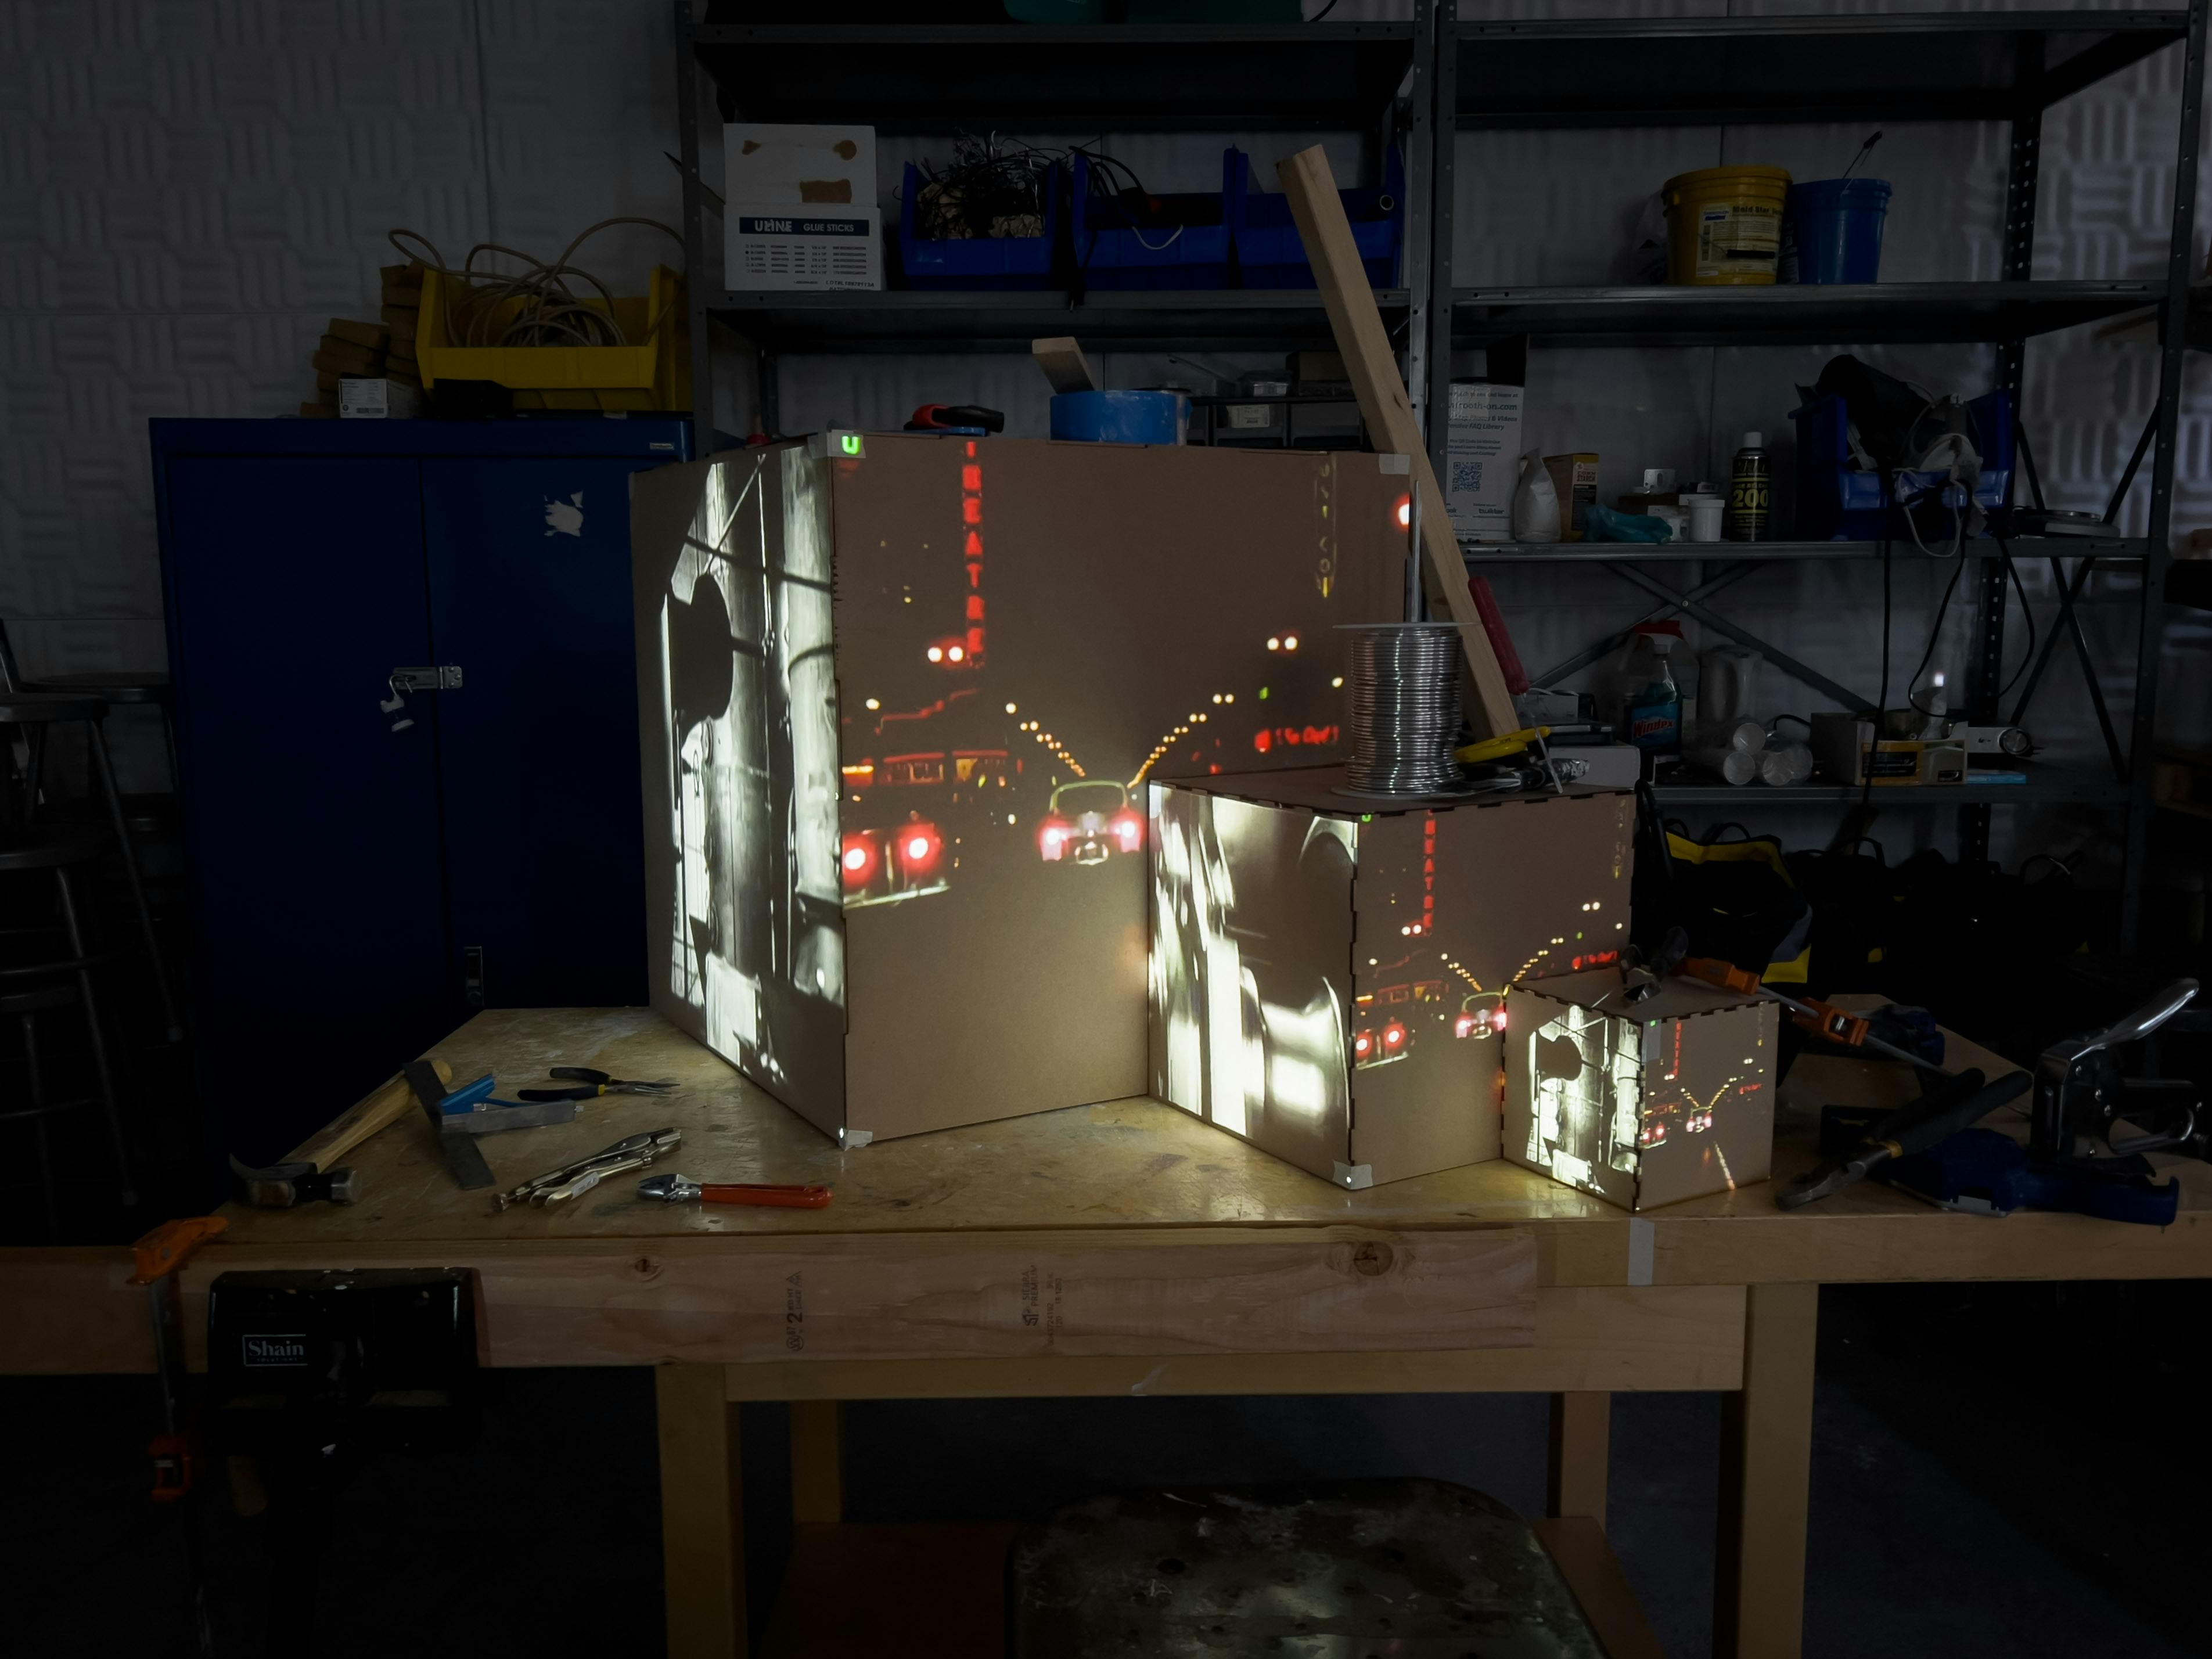 Video of a car driving at night projected onto the three cardboard cubes